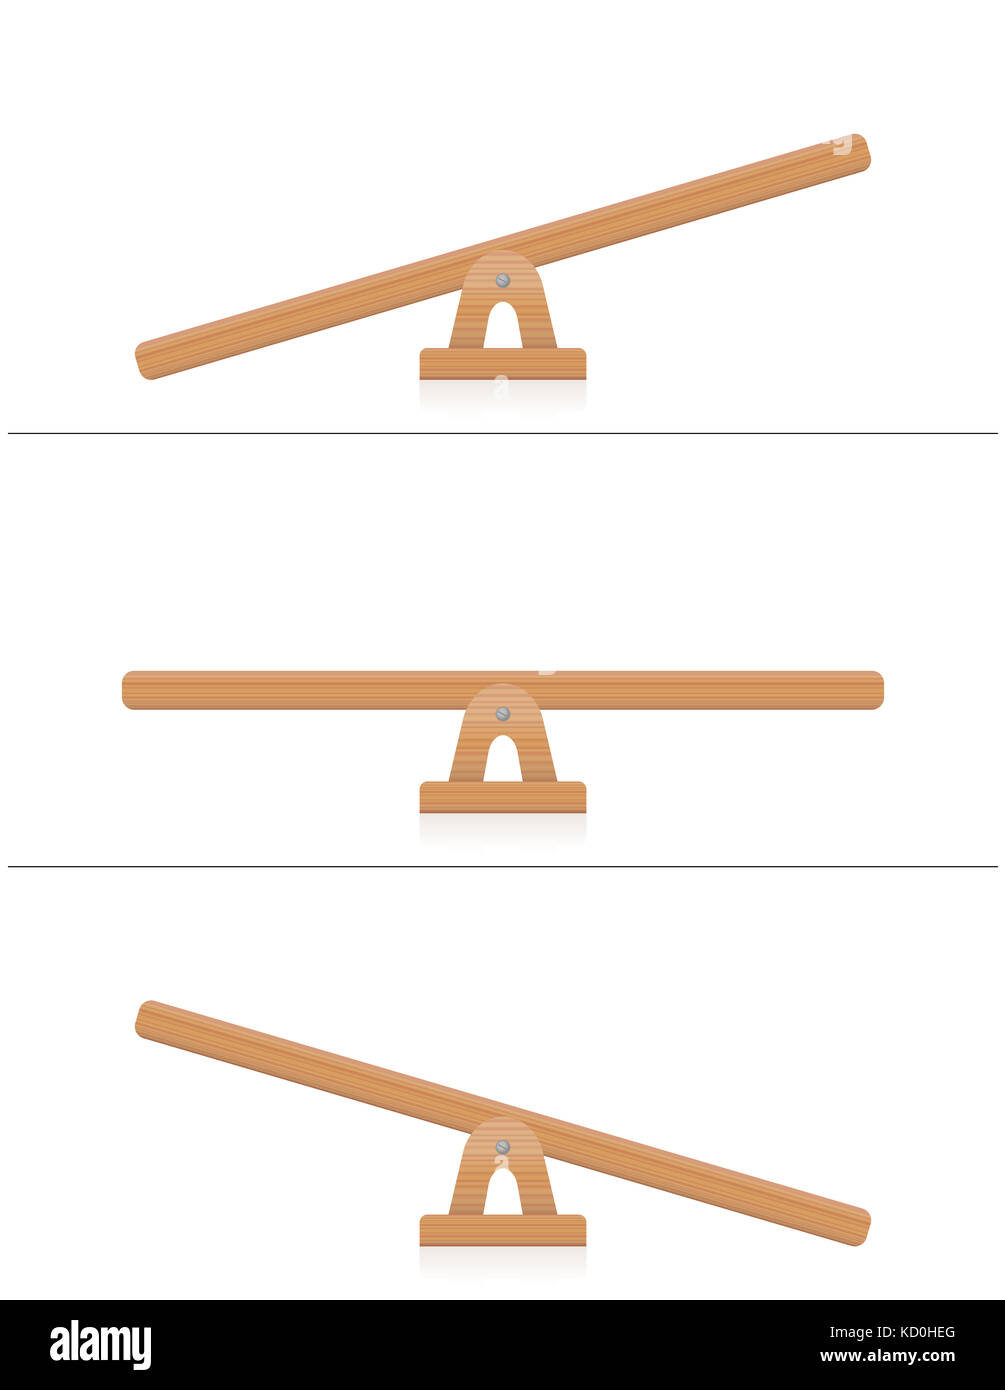 Seesaw or wooden balance scale - balanced and unbalanced, equal and unequal weightiness - illustration on white background. Stock Photo